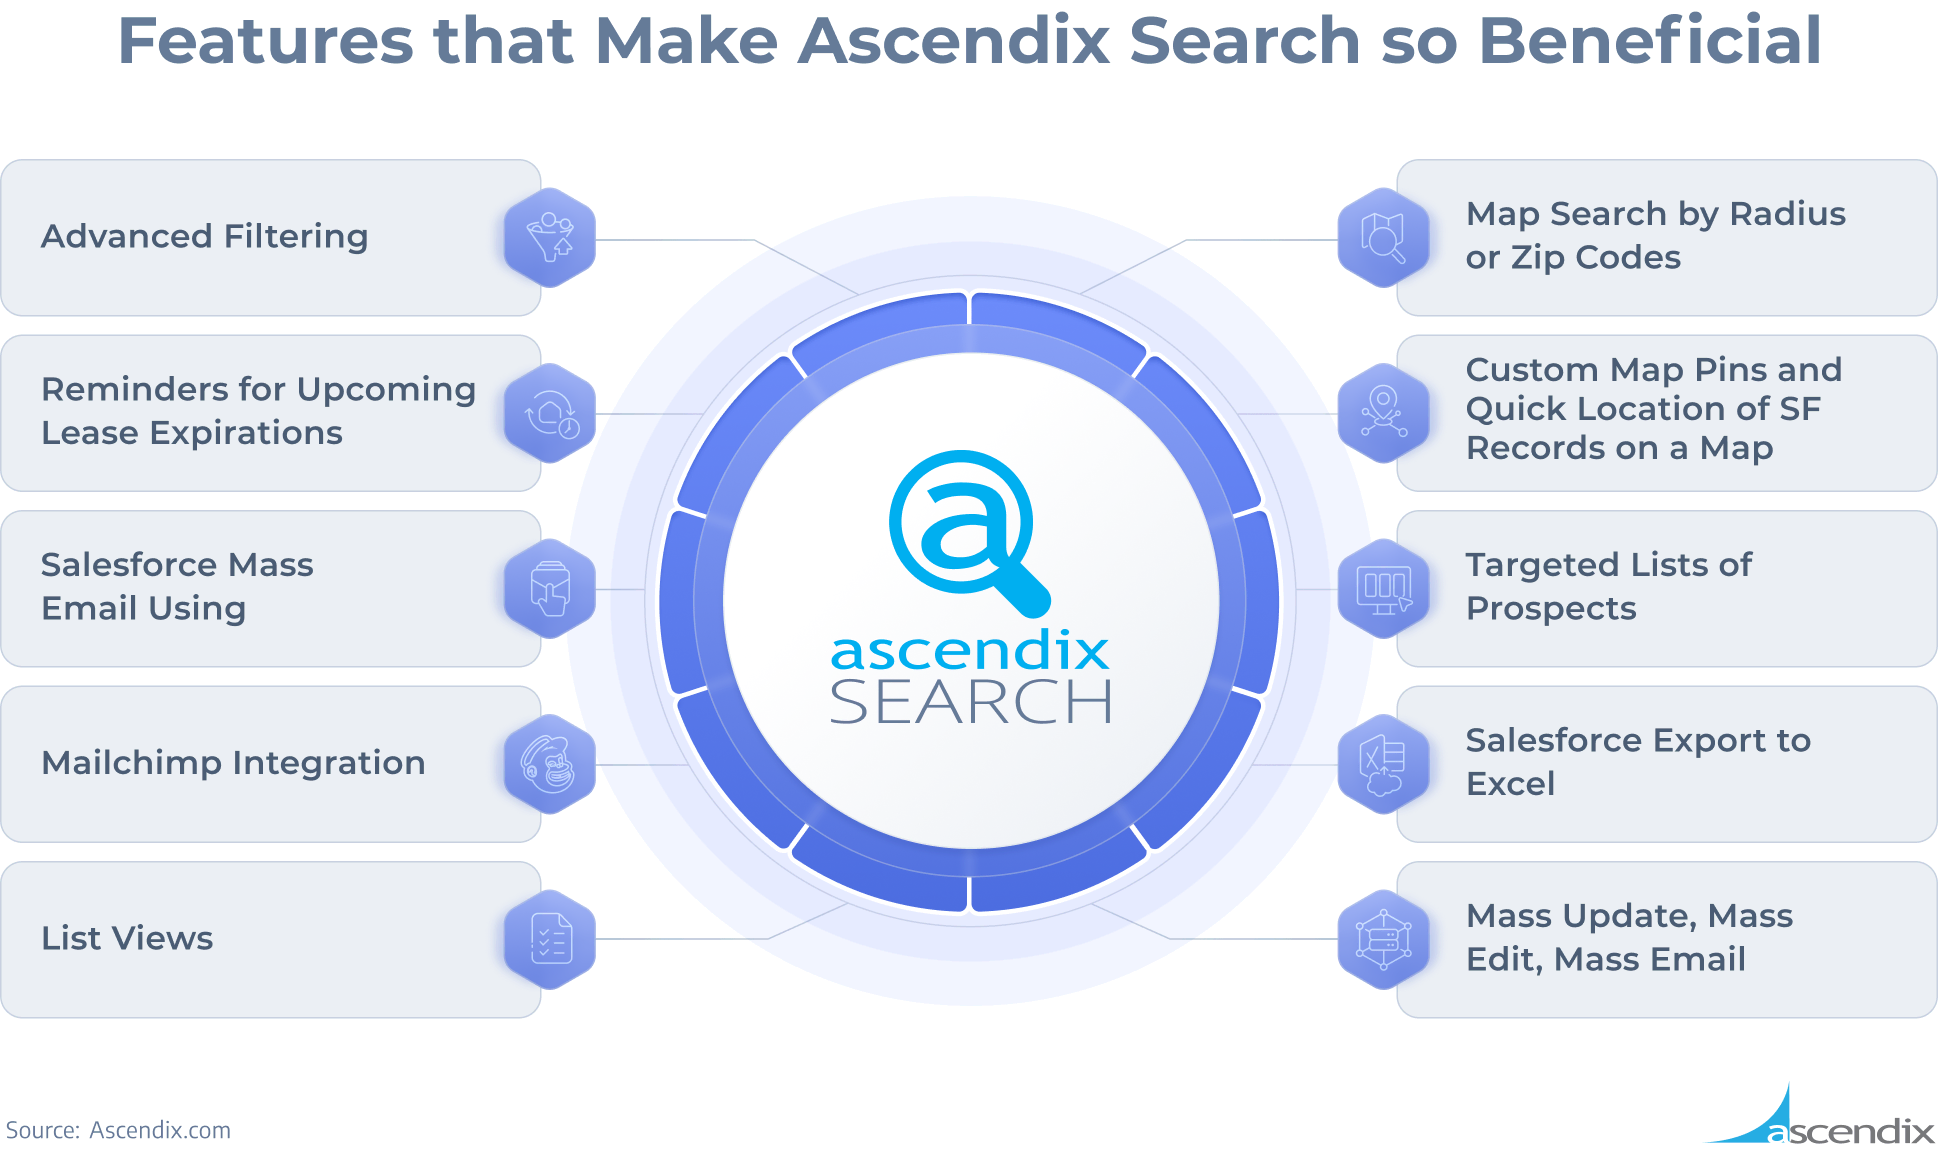 Features that Make Ascendix Search so Beneficial